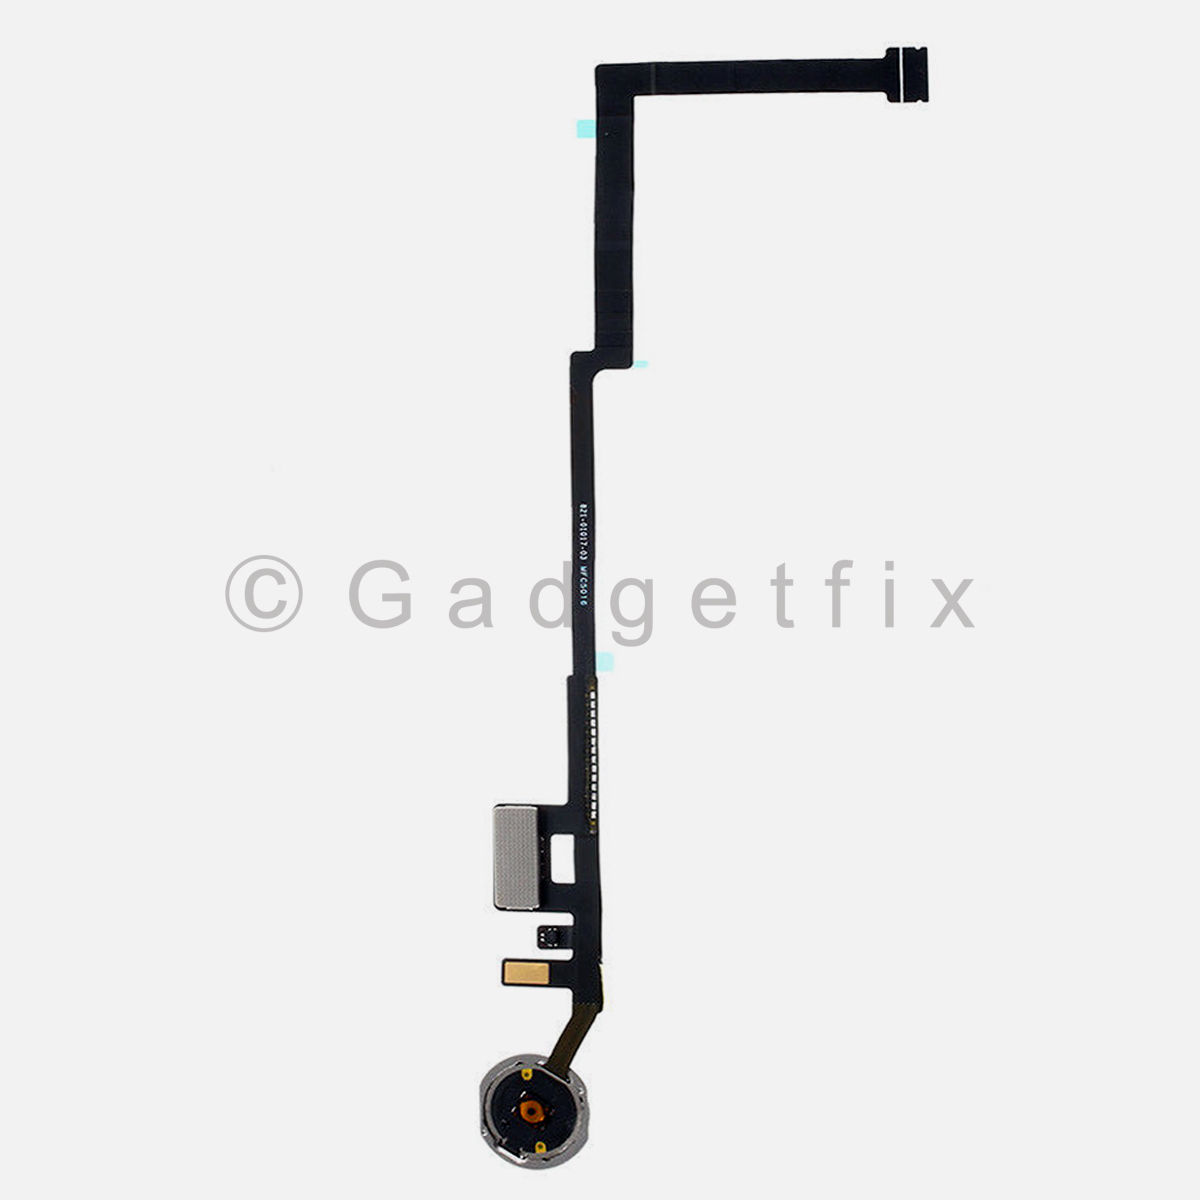 White | Silver Home Button Key Flex Cable Connector For iPad 5th Gen 2017 A1822 A1823